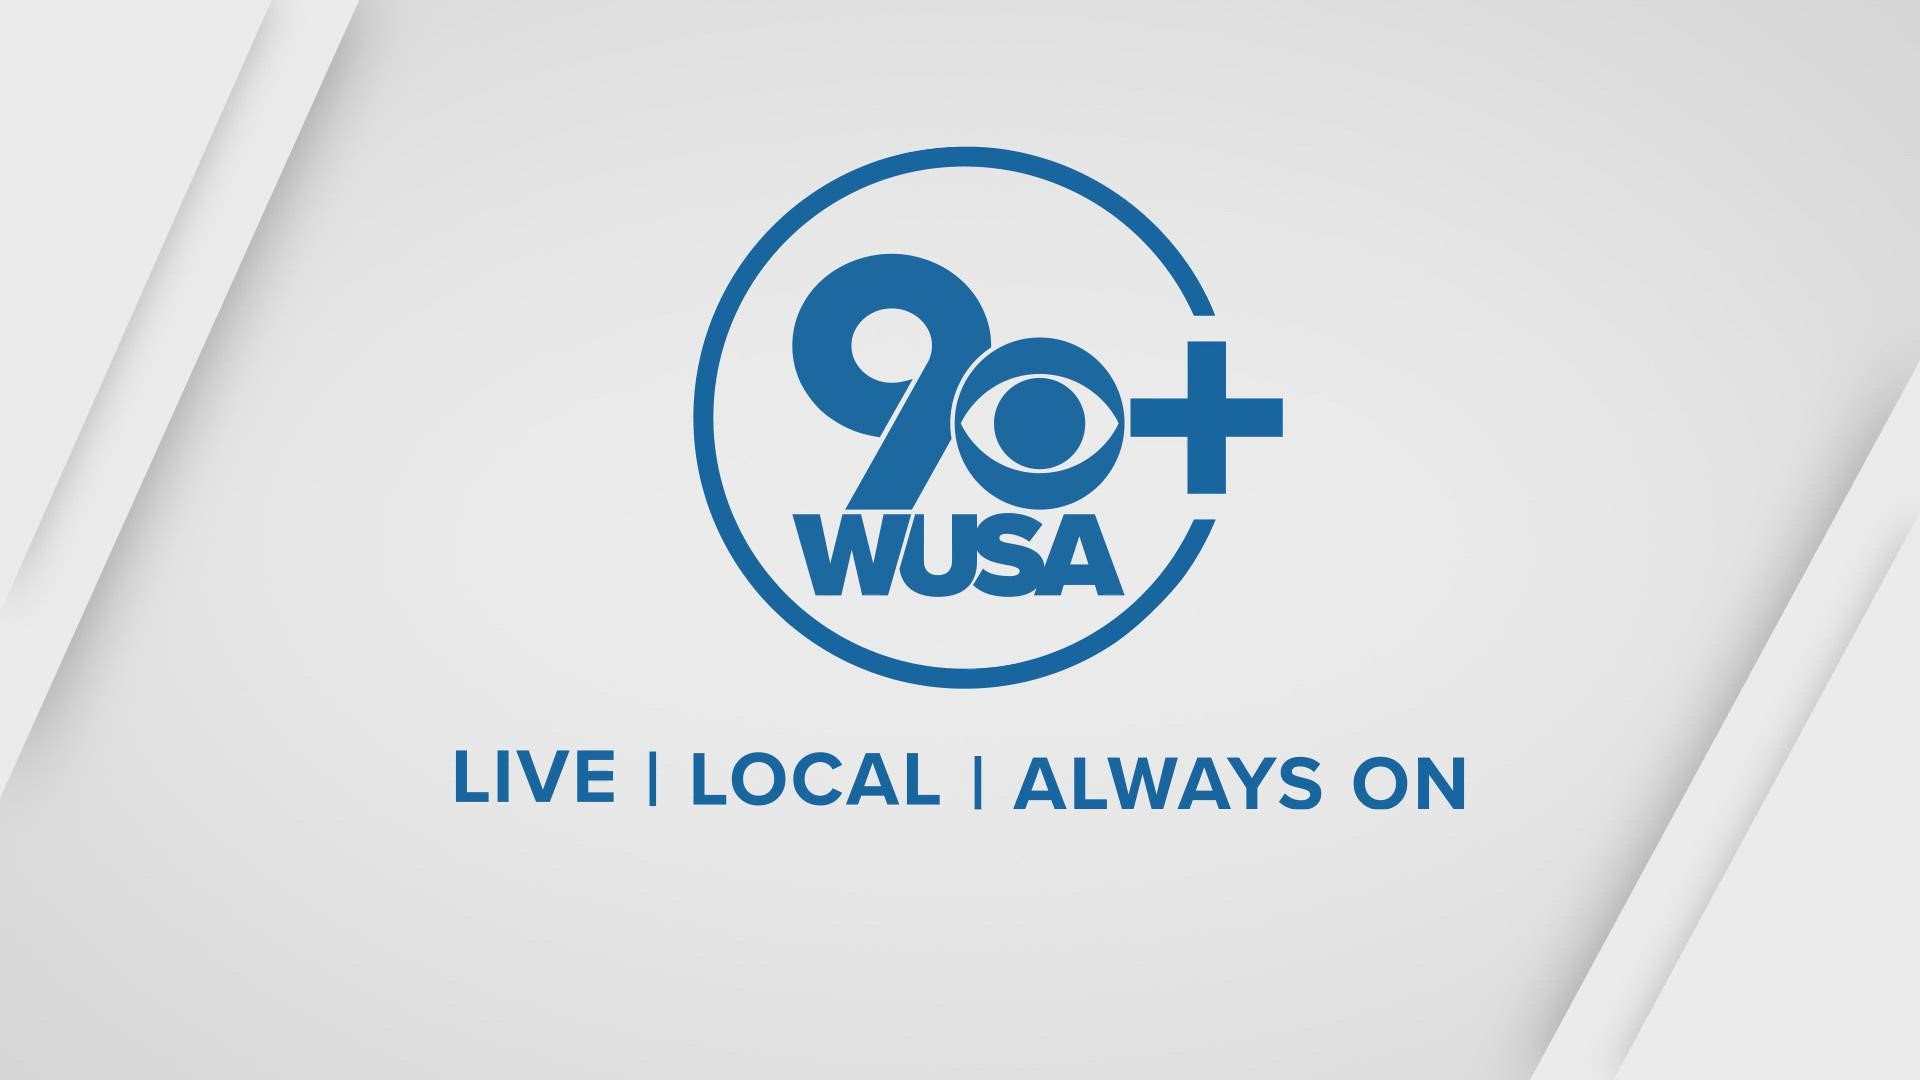 In this special, WUSA9 brings you never-heard-before interviews and video of Jan. 6 - some of which were obtained by WUSA9 through legal challenges.